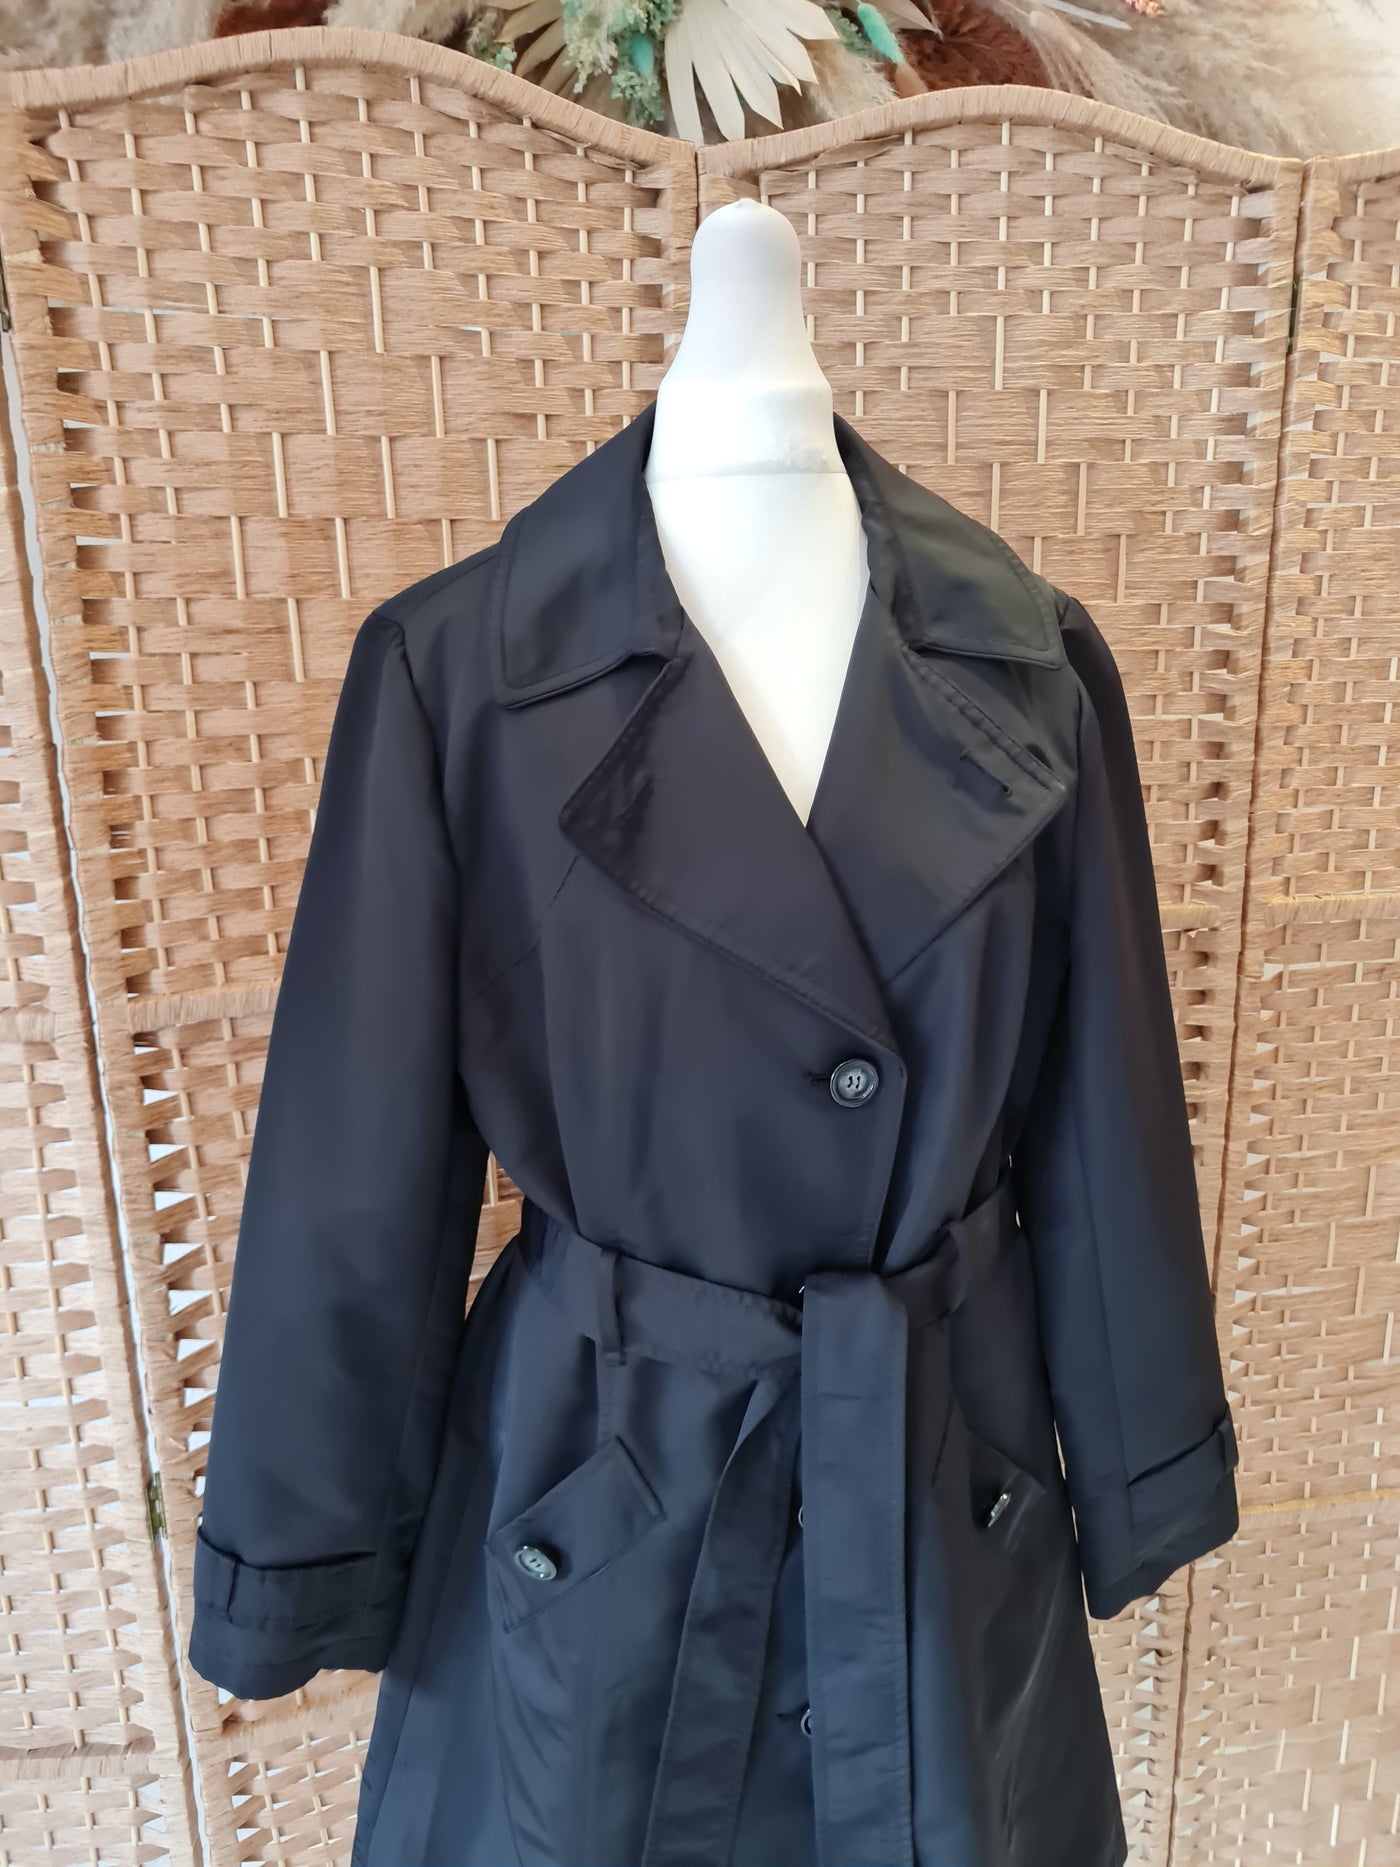 M&S Black Trench Size 12